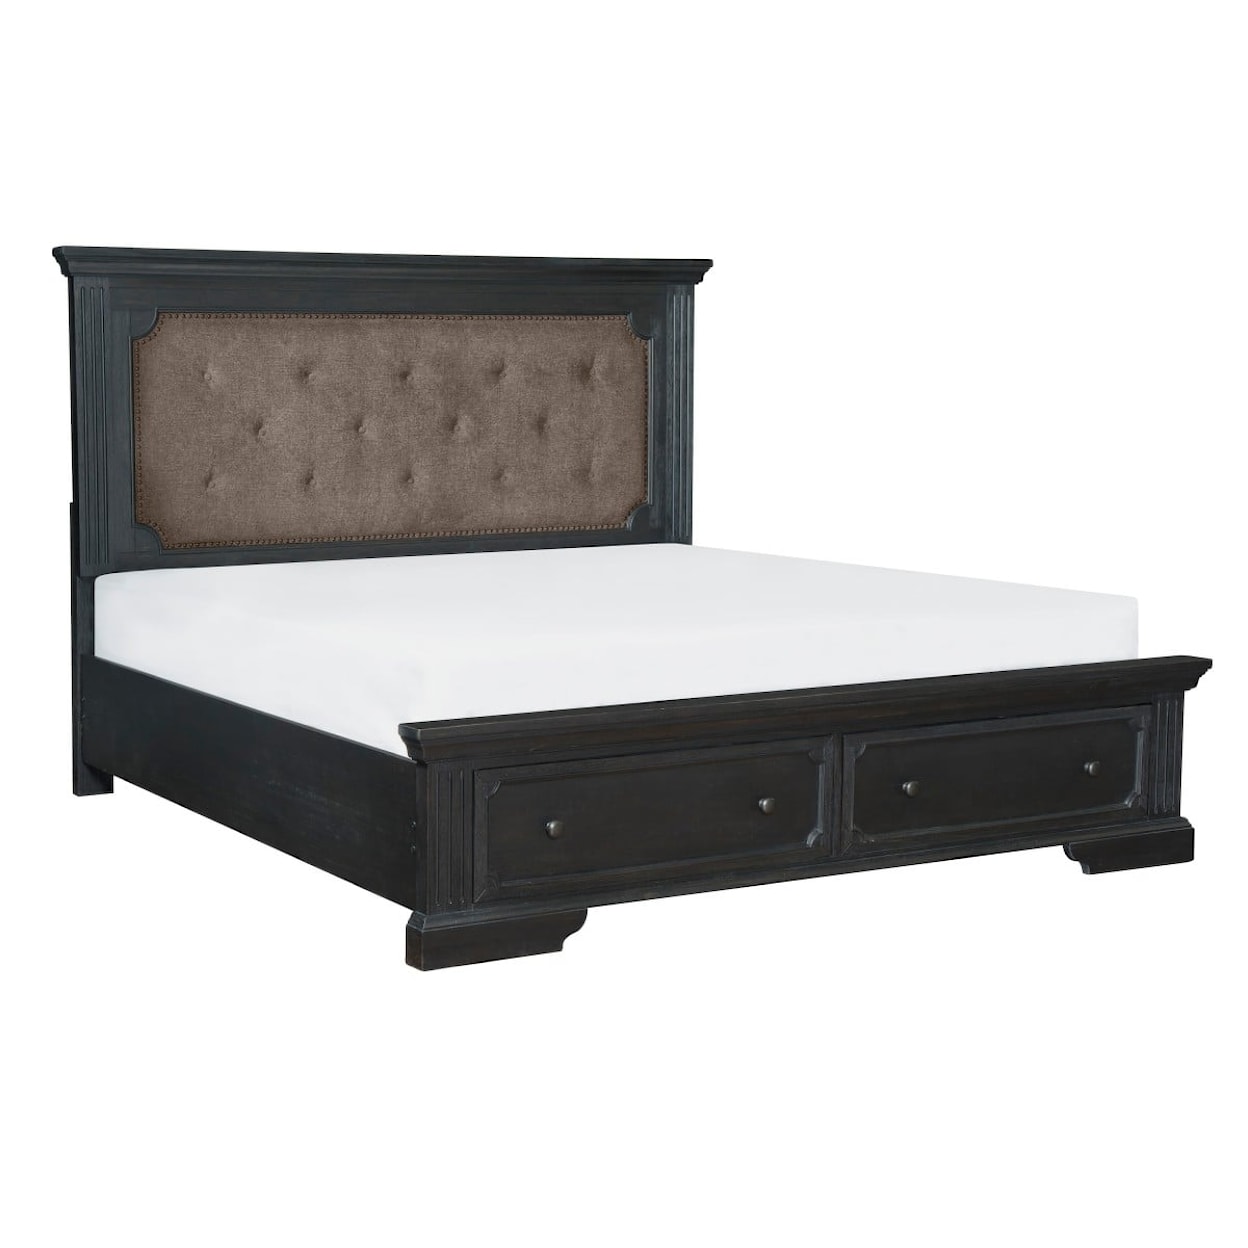 Homelegance Bolingbrook Queen Bed with Footboard Storage